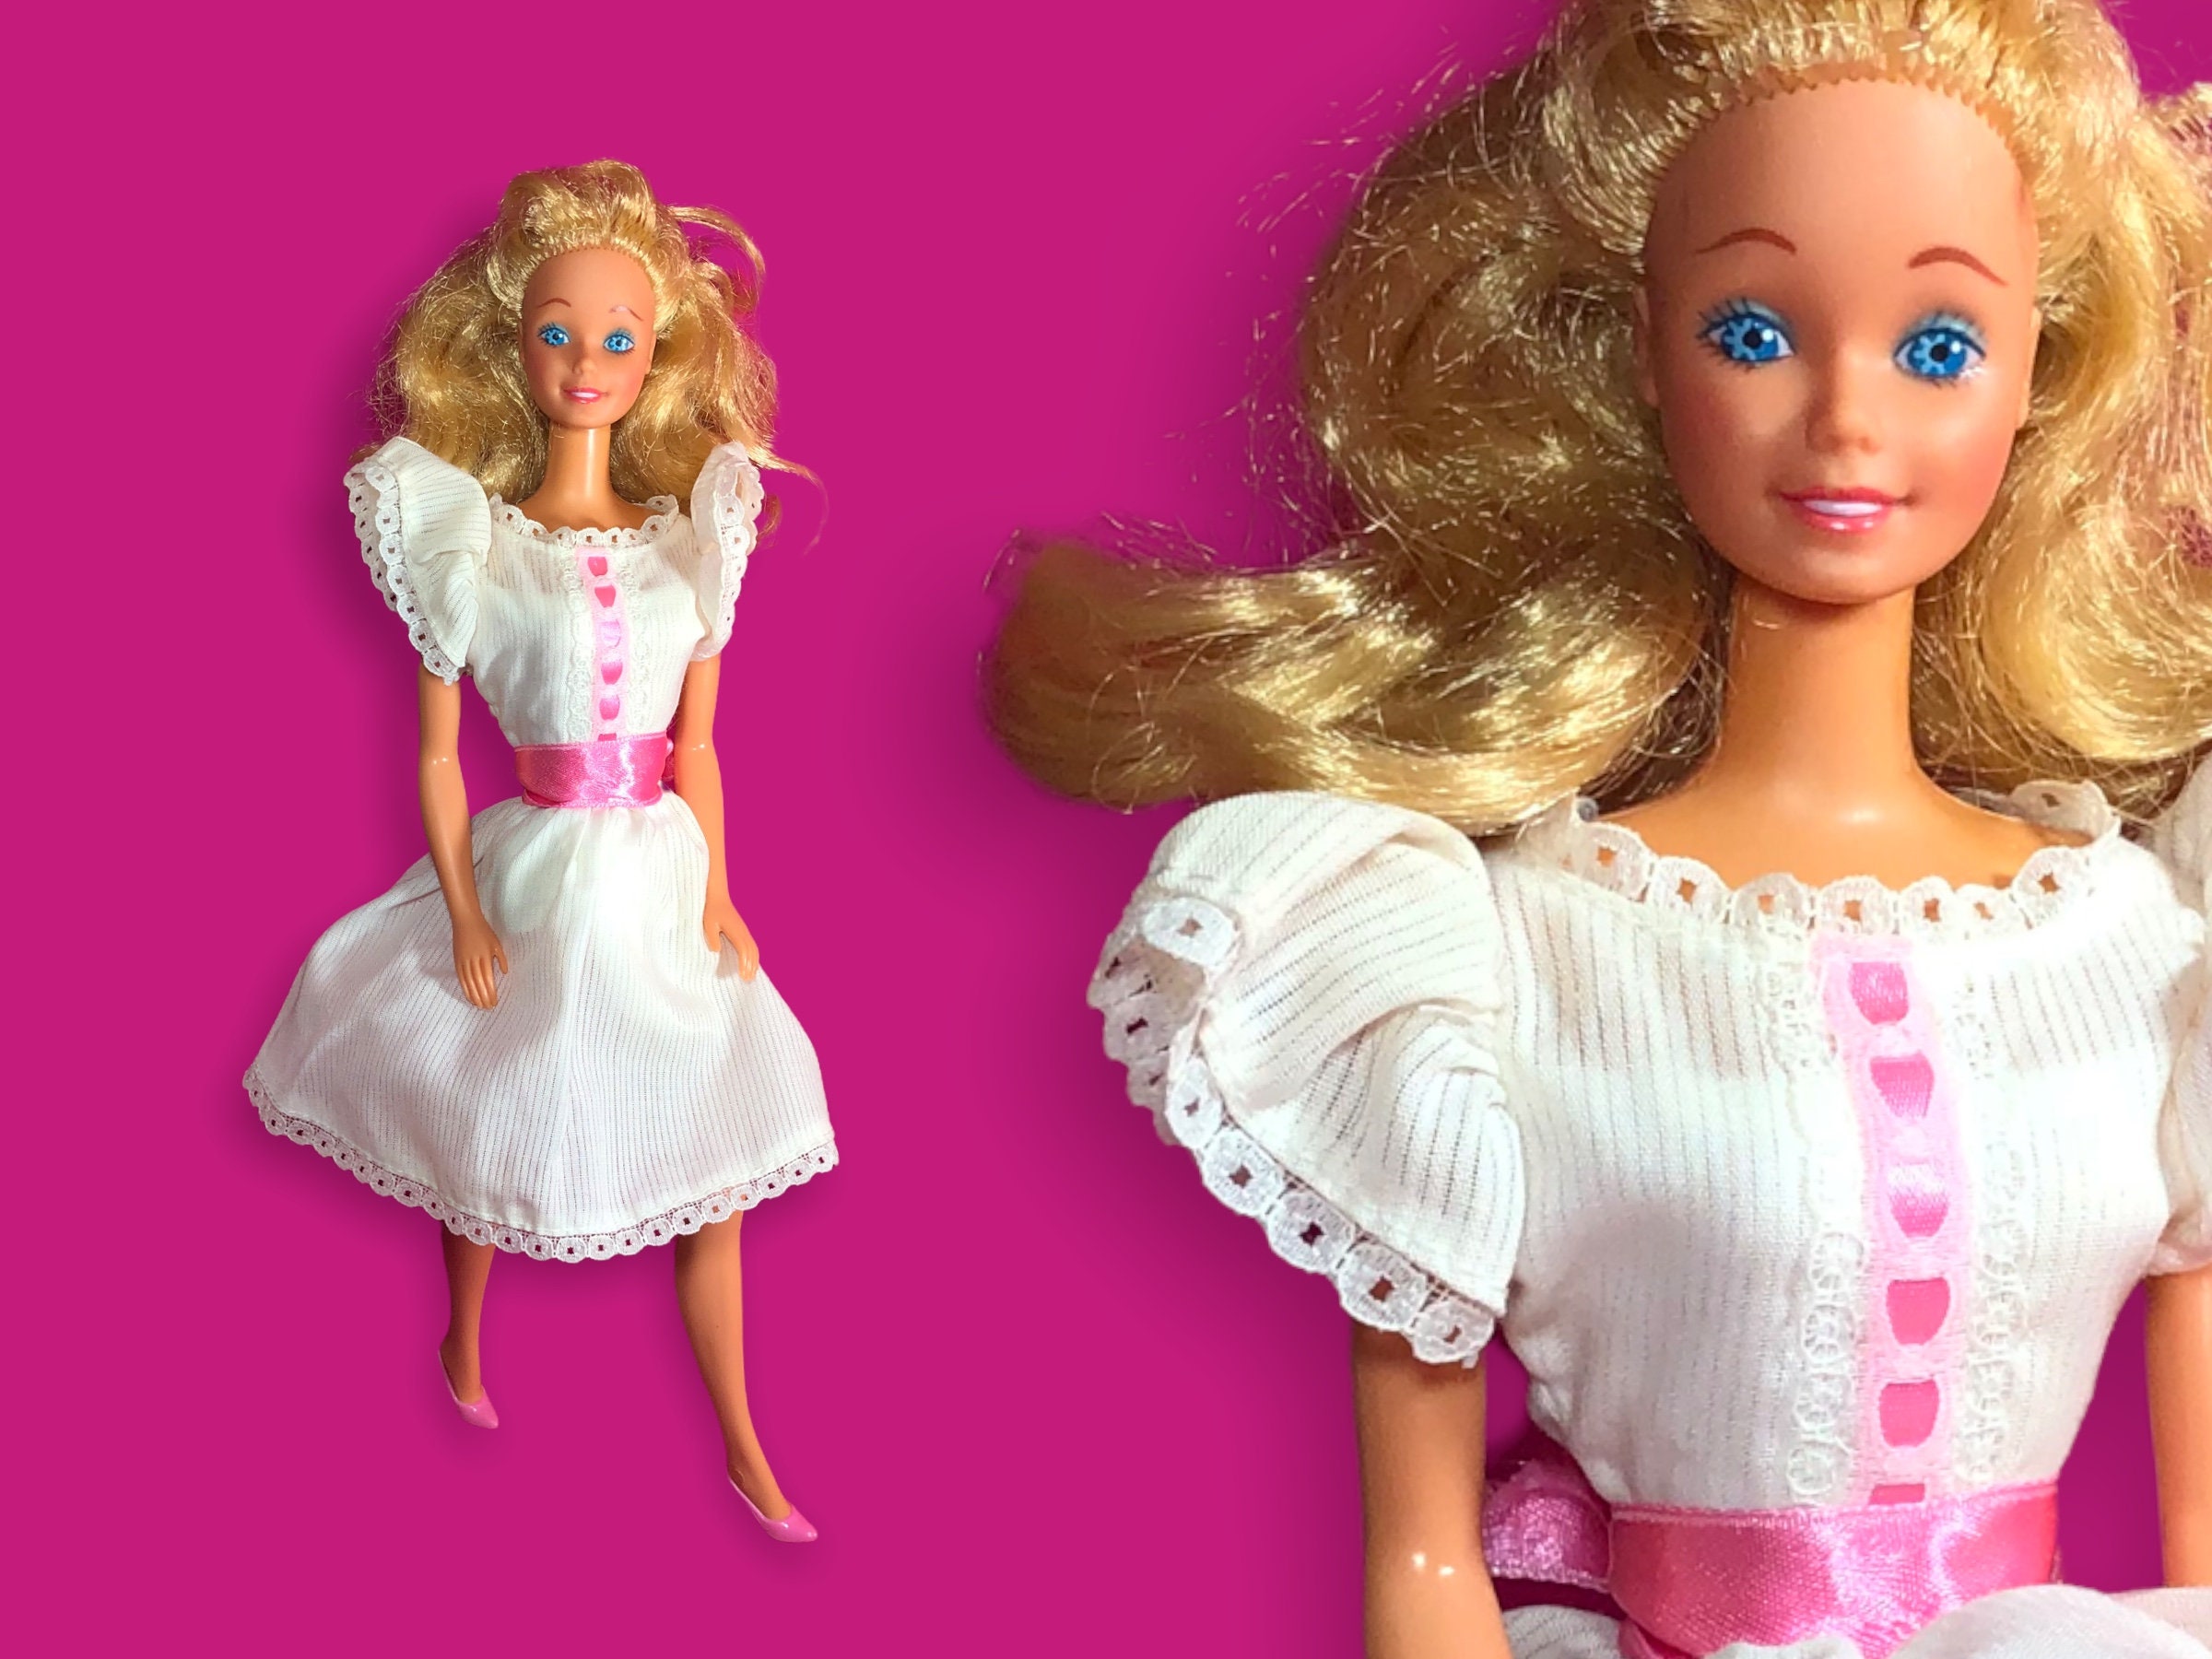 Vintage 1984 My First Barbie doll with white dress & shoes - Etsy 日本